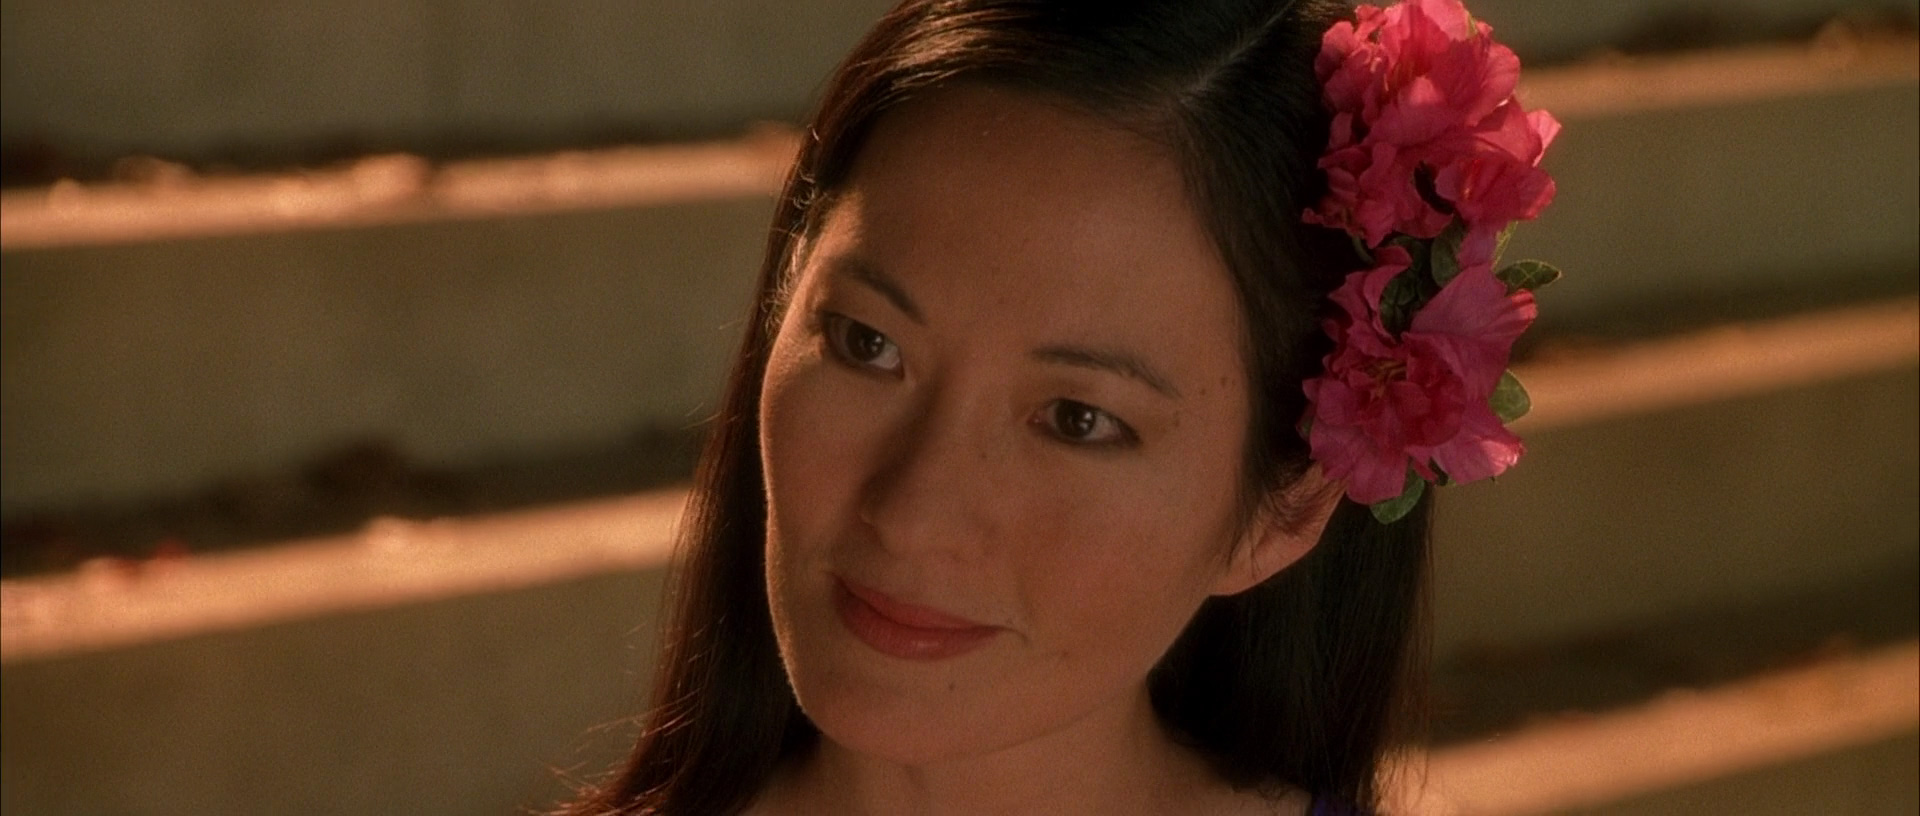 Rosalind Chao in What Dreams May Come